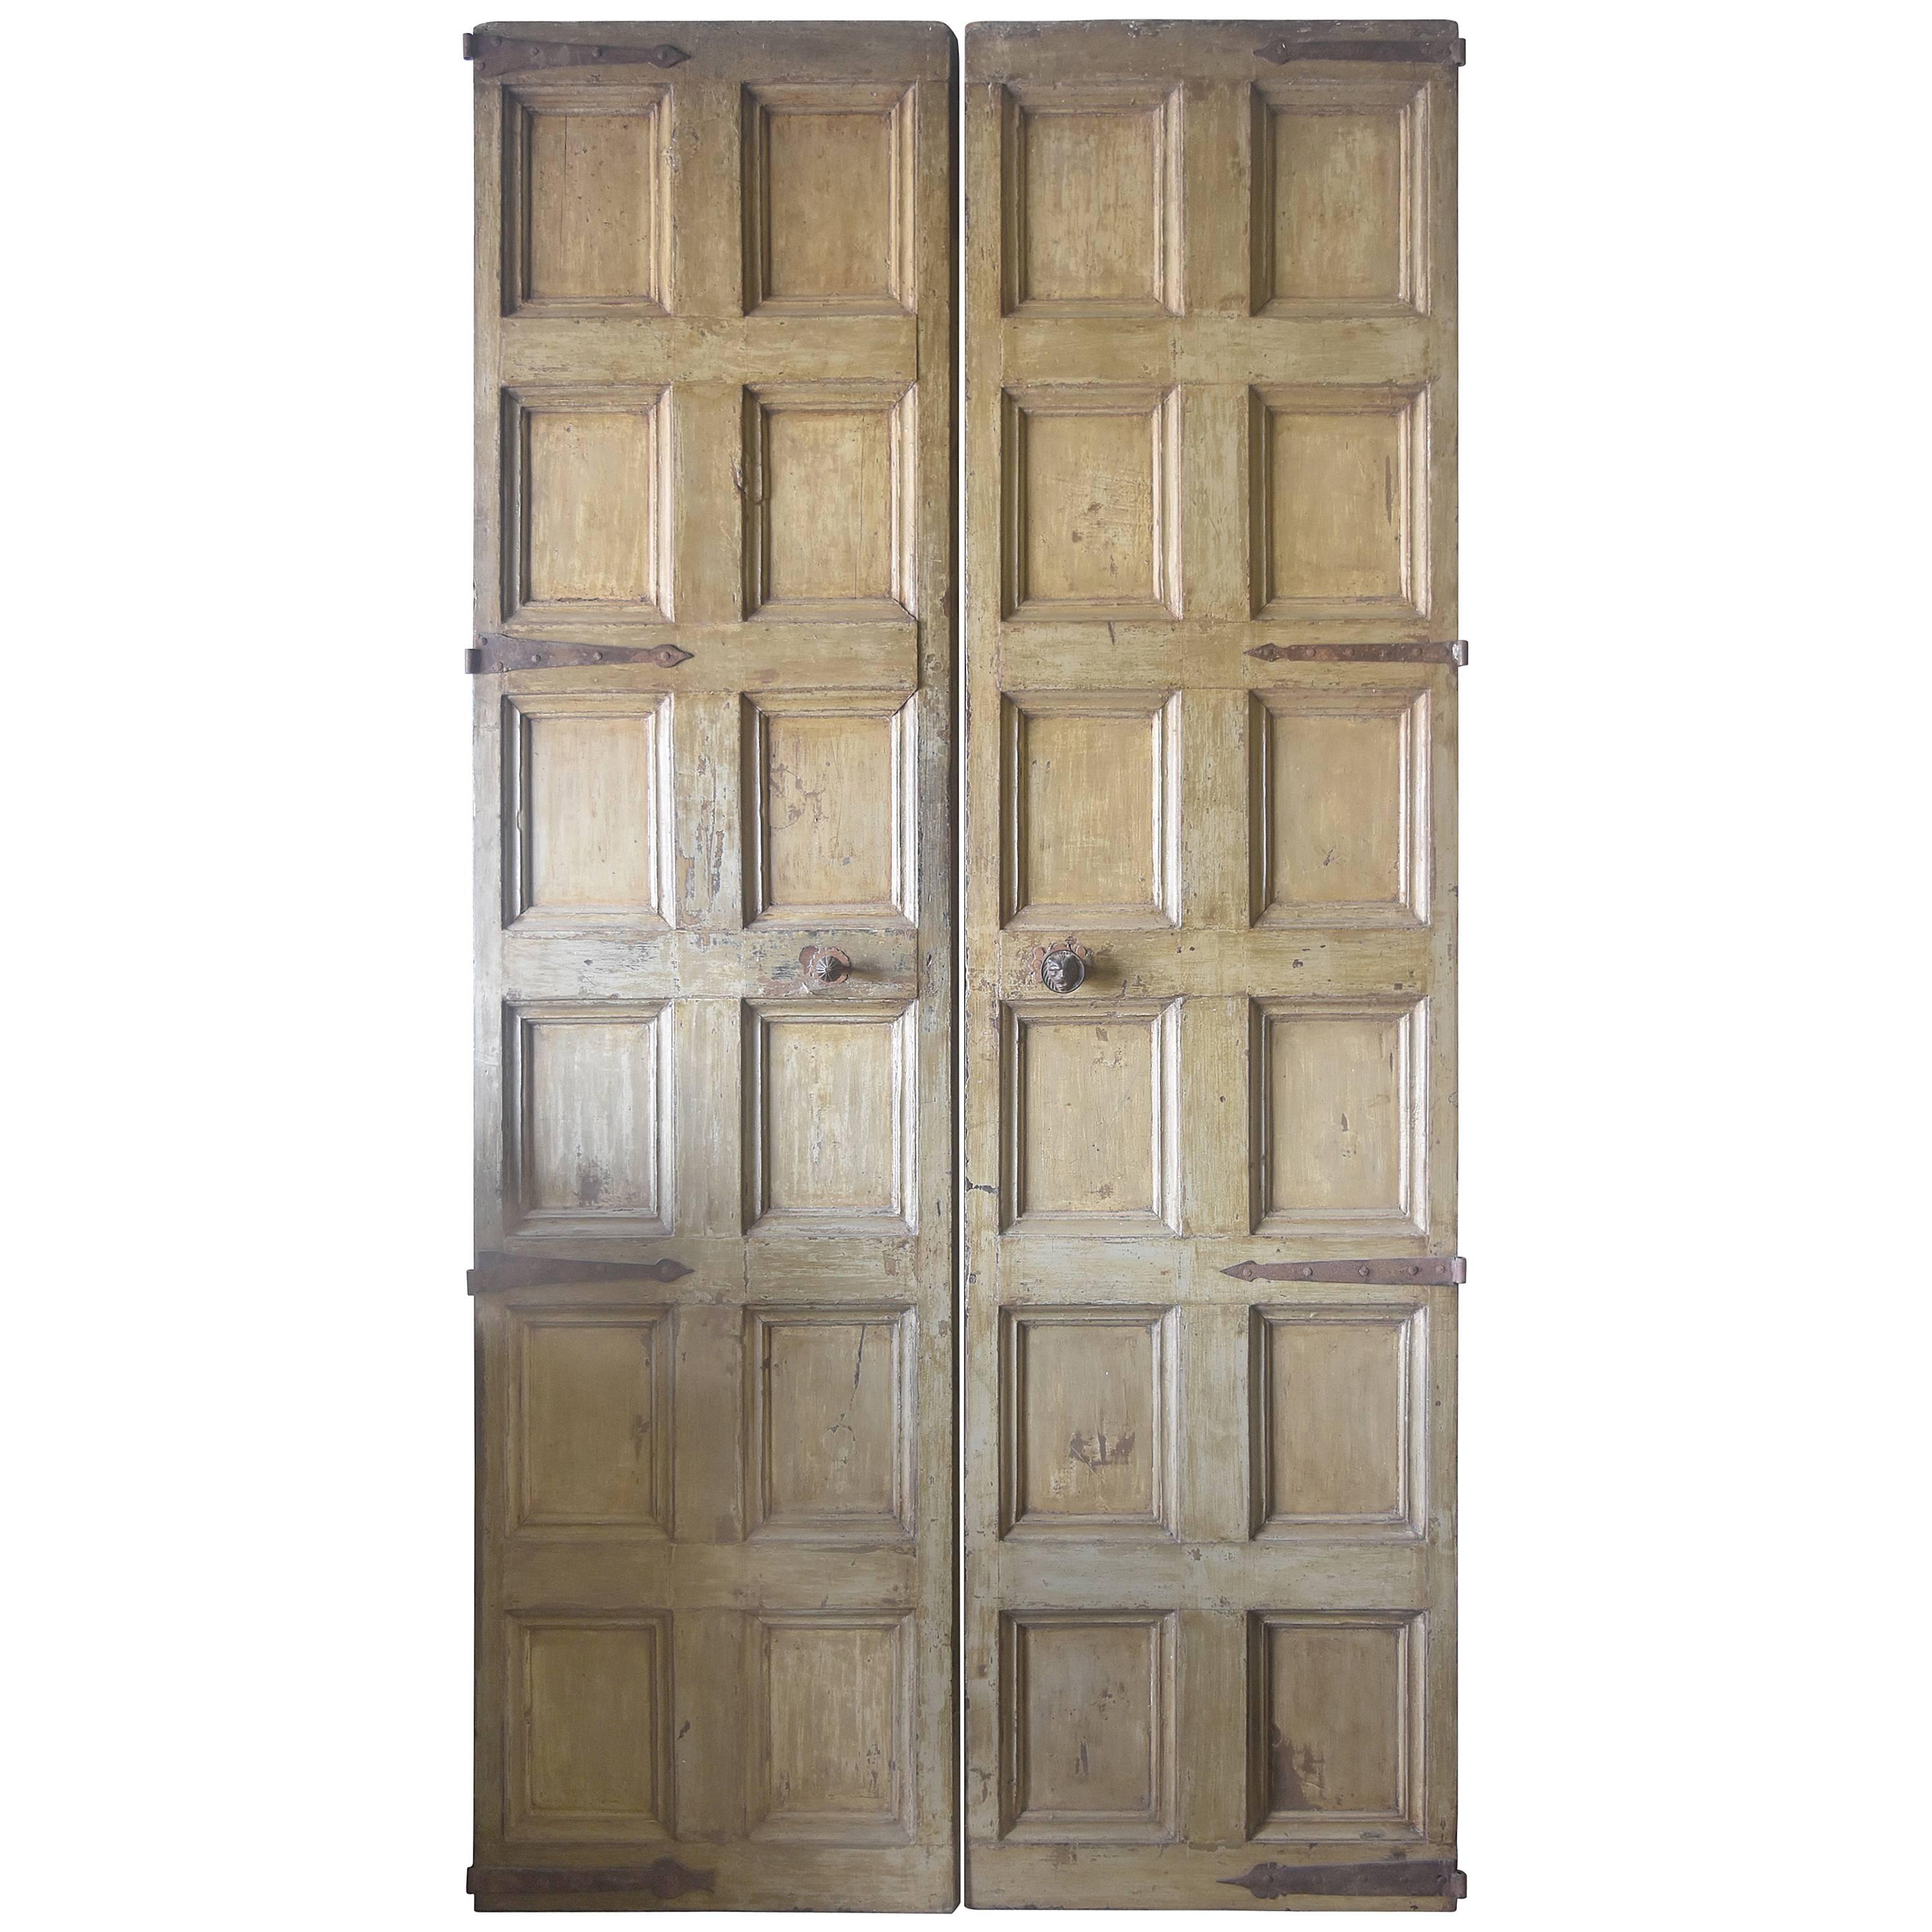 Spanish Late 18th Century 12-Panel Doors with Original Hardware and Paint